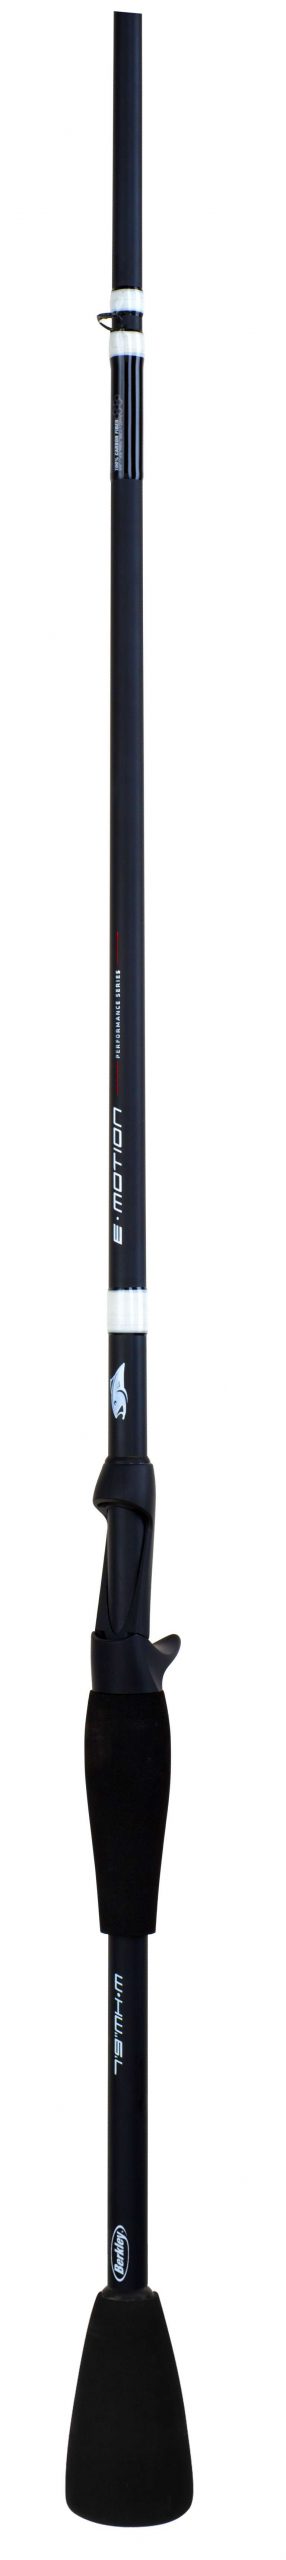 <B>BERKLEY E-MOTION ROD</b>
This series of rods has been designed to combine performance and function with a best-in-class value. The blank is constructed of 100 percent carbon fiber and includes the High Energy Transfer Reel Seat Design, which is said to deliver more energy from butt to tip during hook sets. Eleven casting and four spinning rods are available at an MSRP of $79.95.